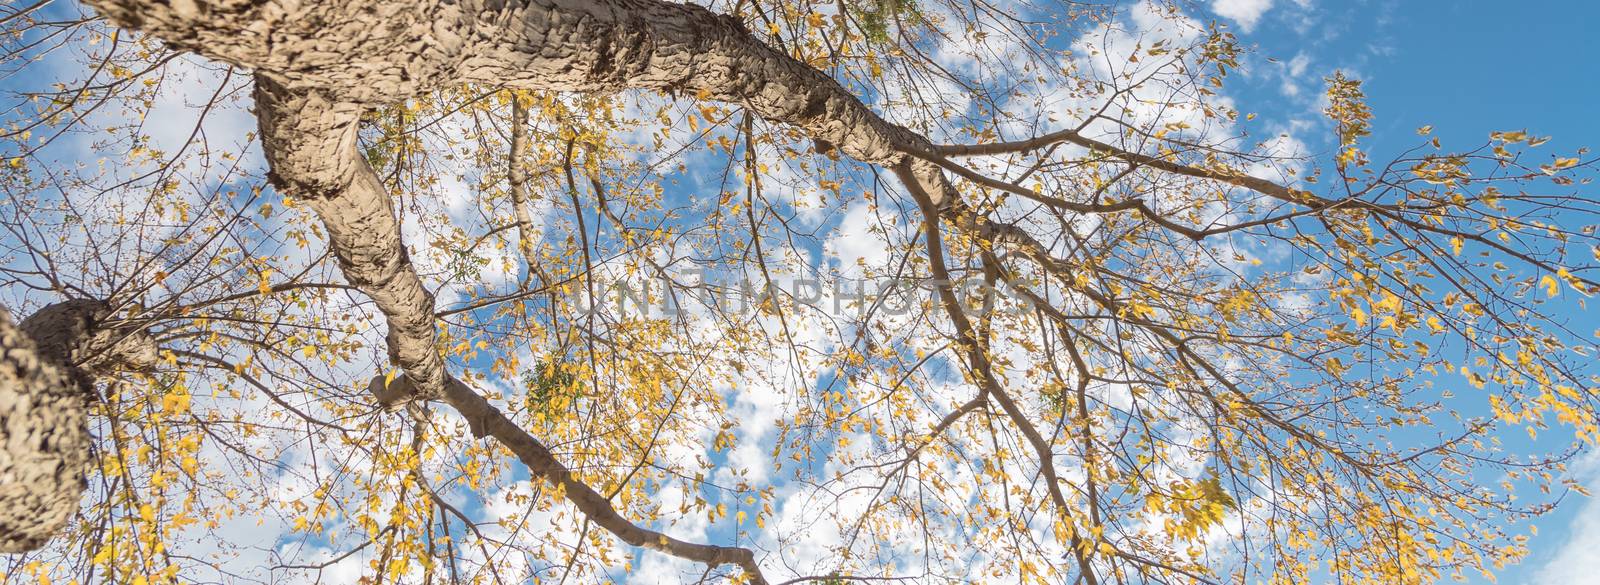 Panorama upward perspective vibrant yellow maple leaves changing color during fall season in Dallas, Texas, USA. Tree tops converging into blue sky. Nature wood forest, canopy of tree branches